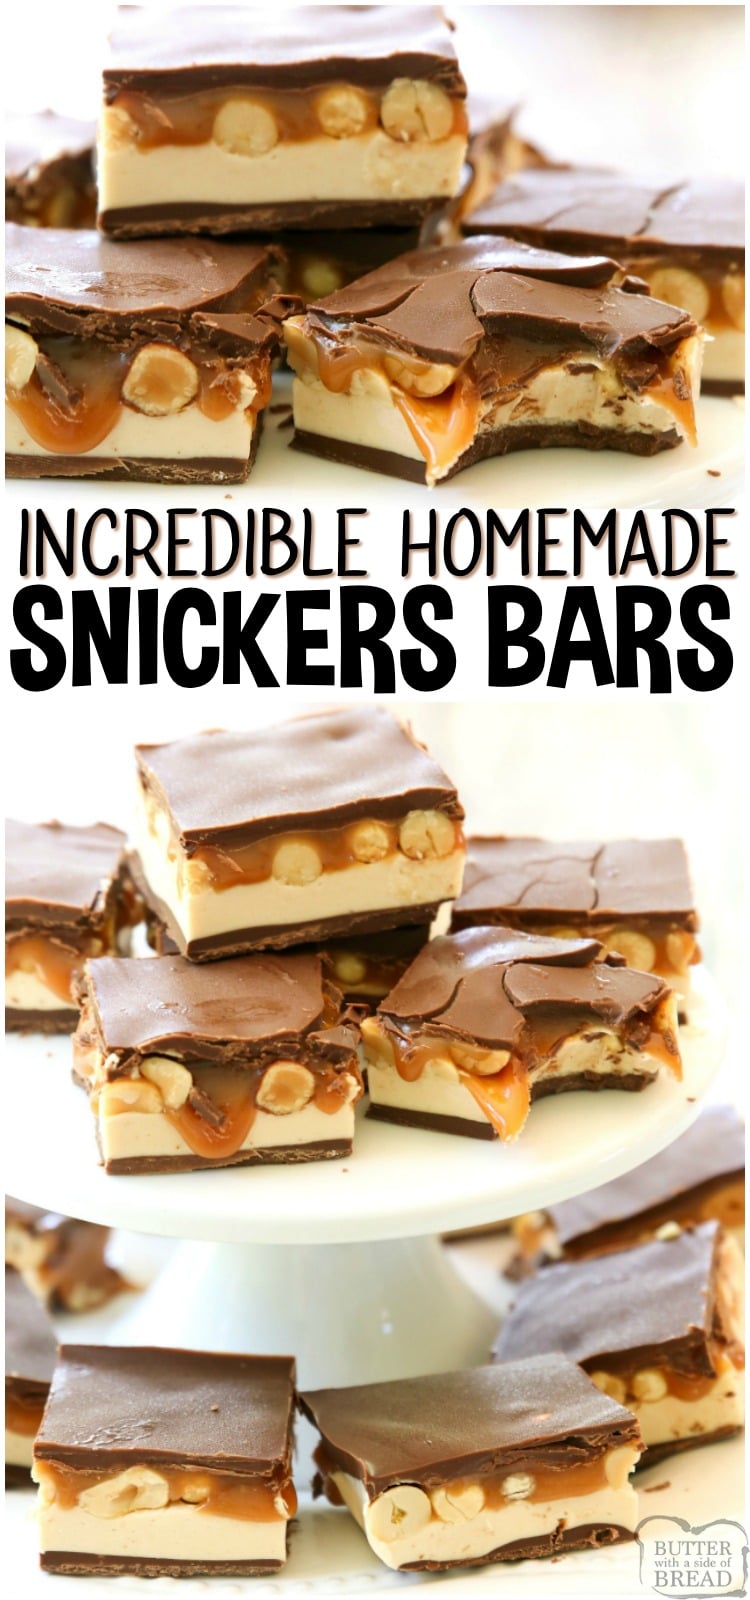 Snickers Bars made from scratch with creamy caramel, easy nougat, peanuts and chocolate. Make a whole pan of your favorite candy bar to share! #snickers #candy #chocolate #homemade #dessert #candybar #peanuts #caramel #candy from BUTTER WITH A SIDE OF BREAD